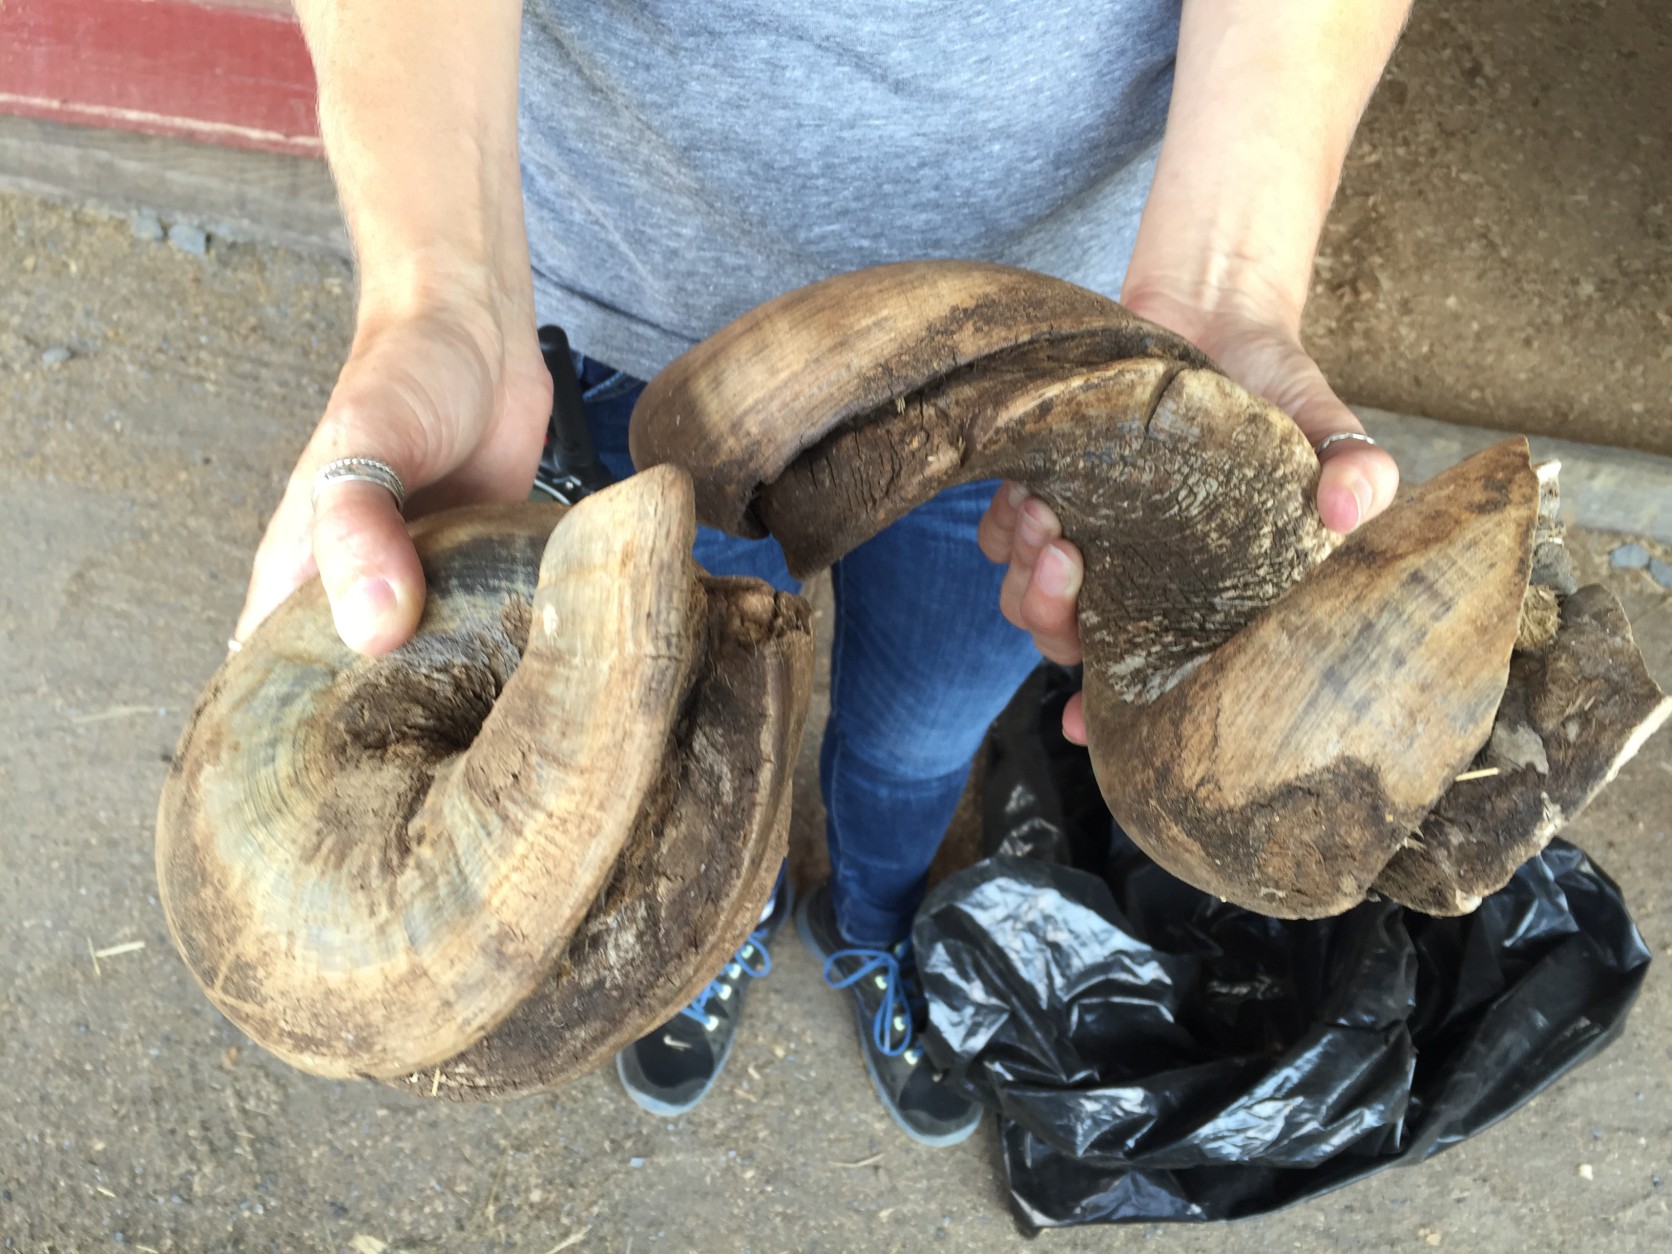 At the same place where the neglected horses were found, these and other cut-off sections of hoof were found. Each likely represents about five years of growth. (WTOP/Michelle Basch)